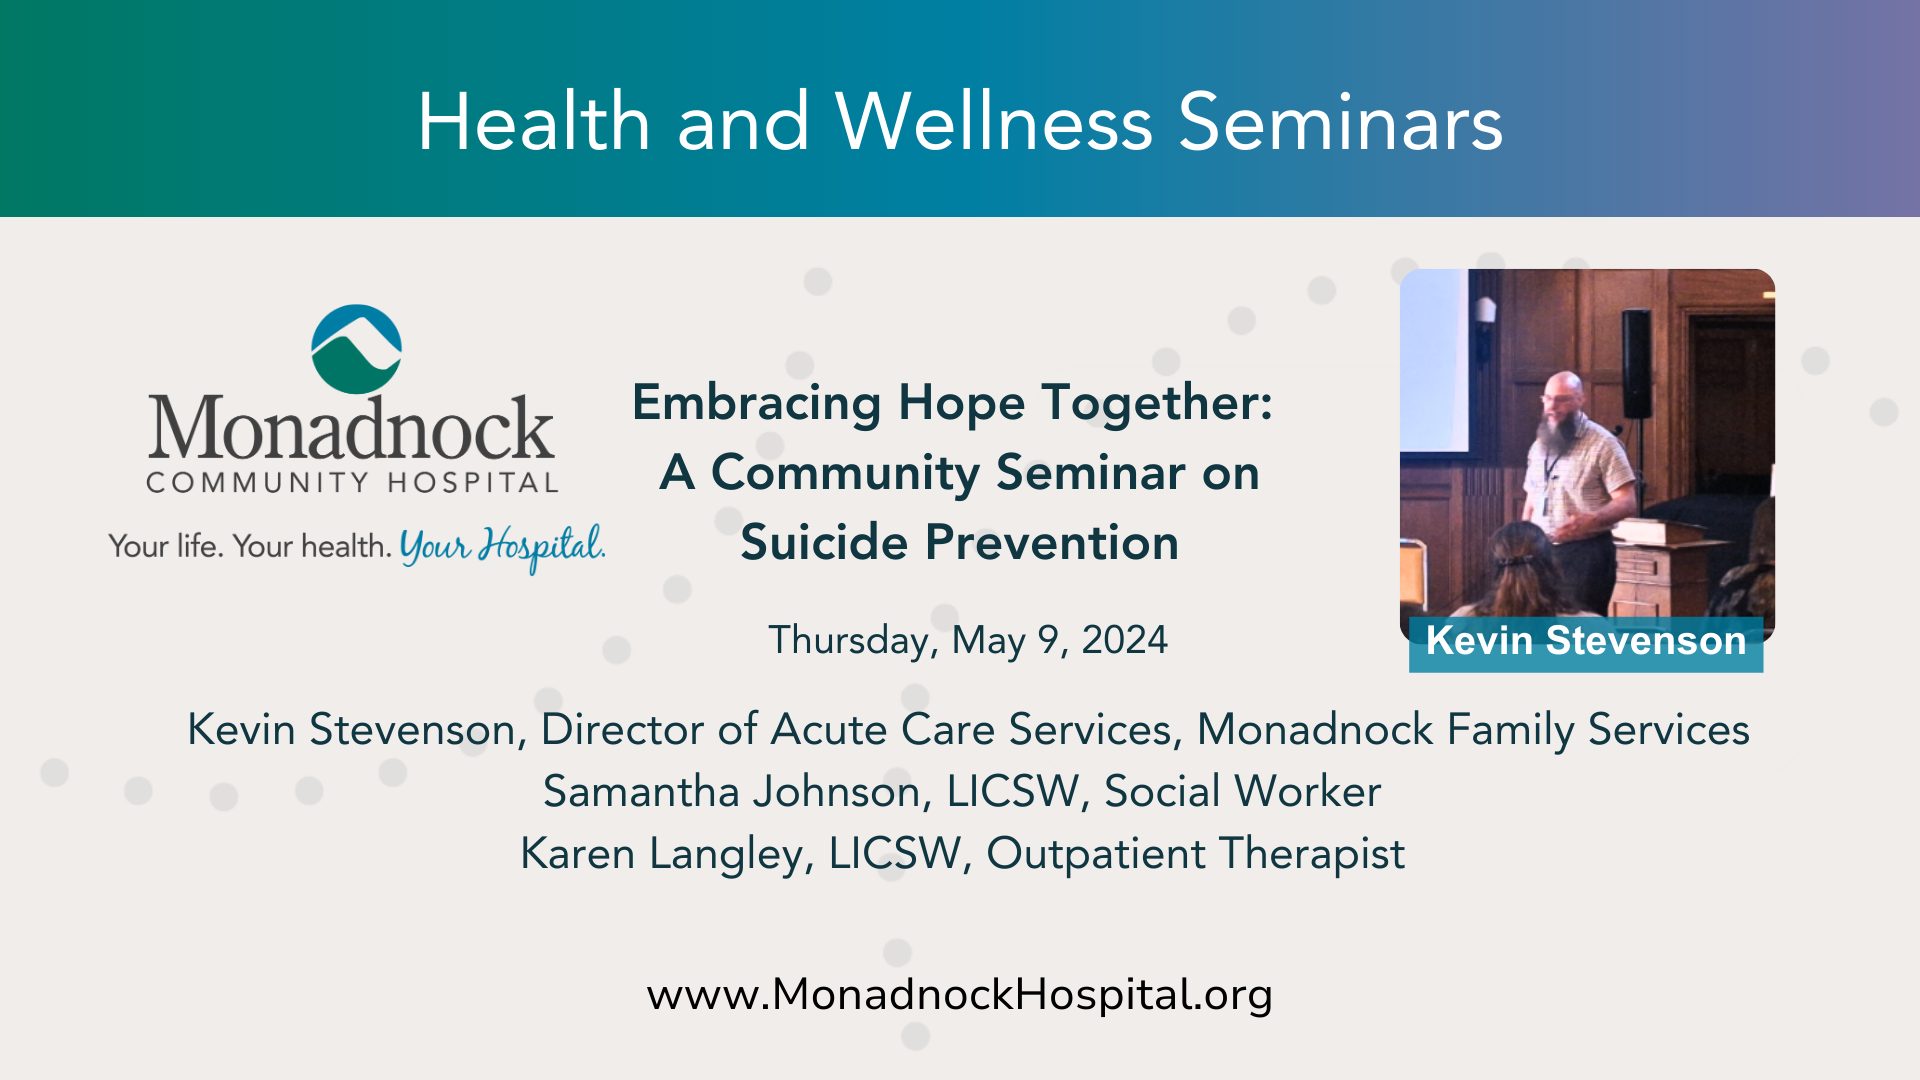 Embracing Hope Together: A Community Seminar on Suicide Prevention